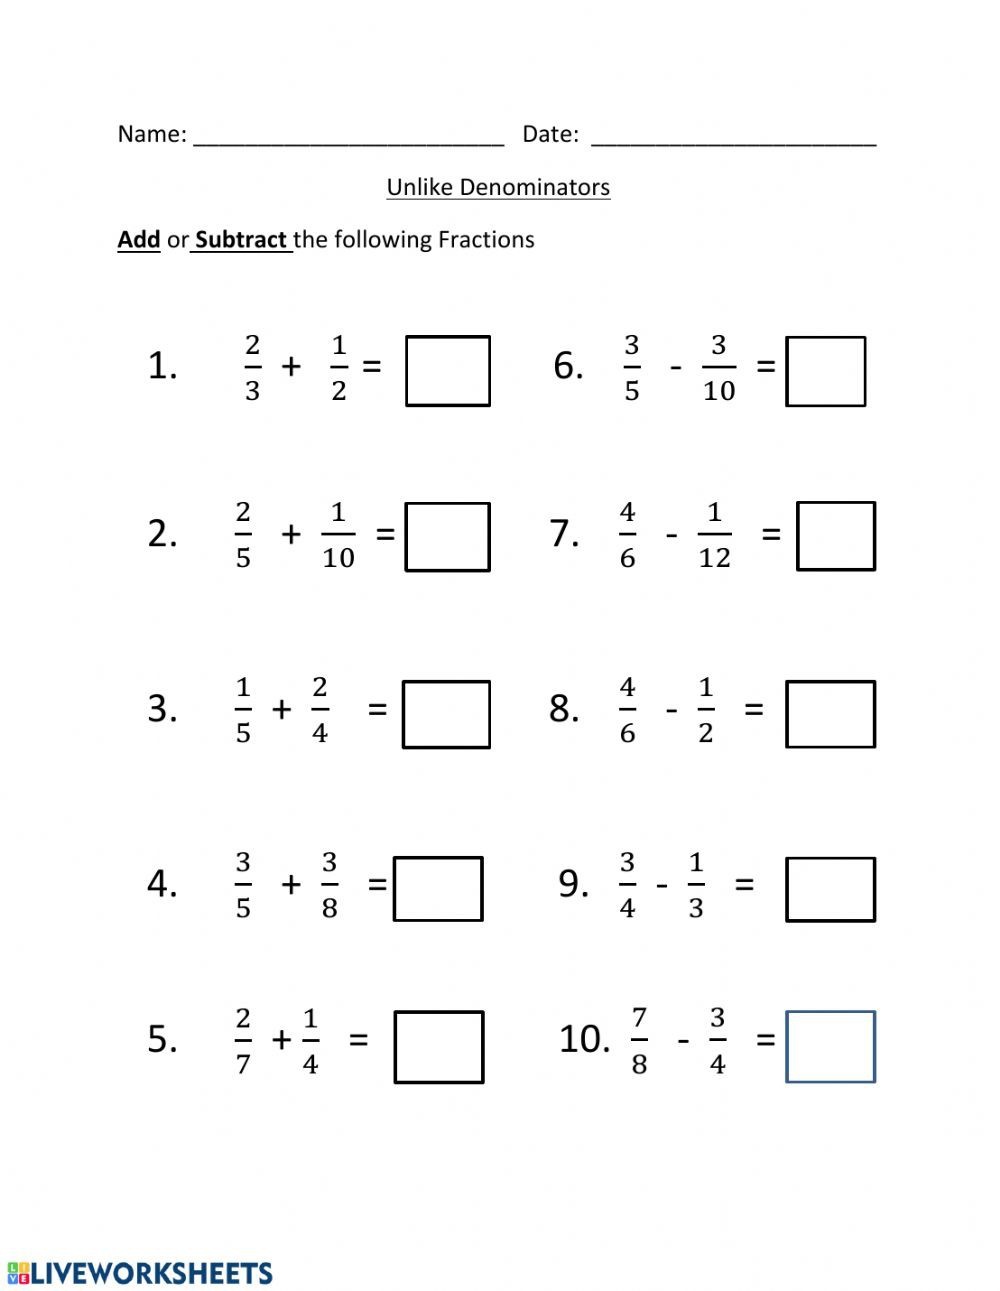 adding-and-subtracting-like-fractions-worksheet